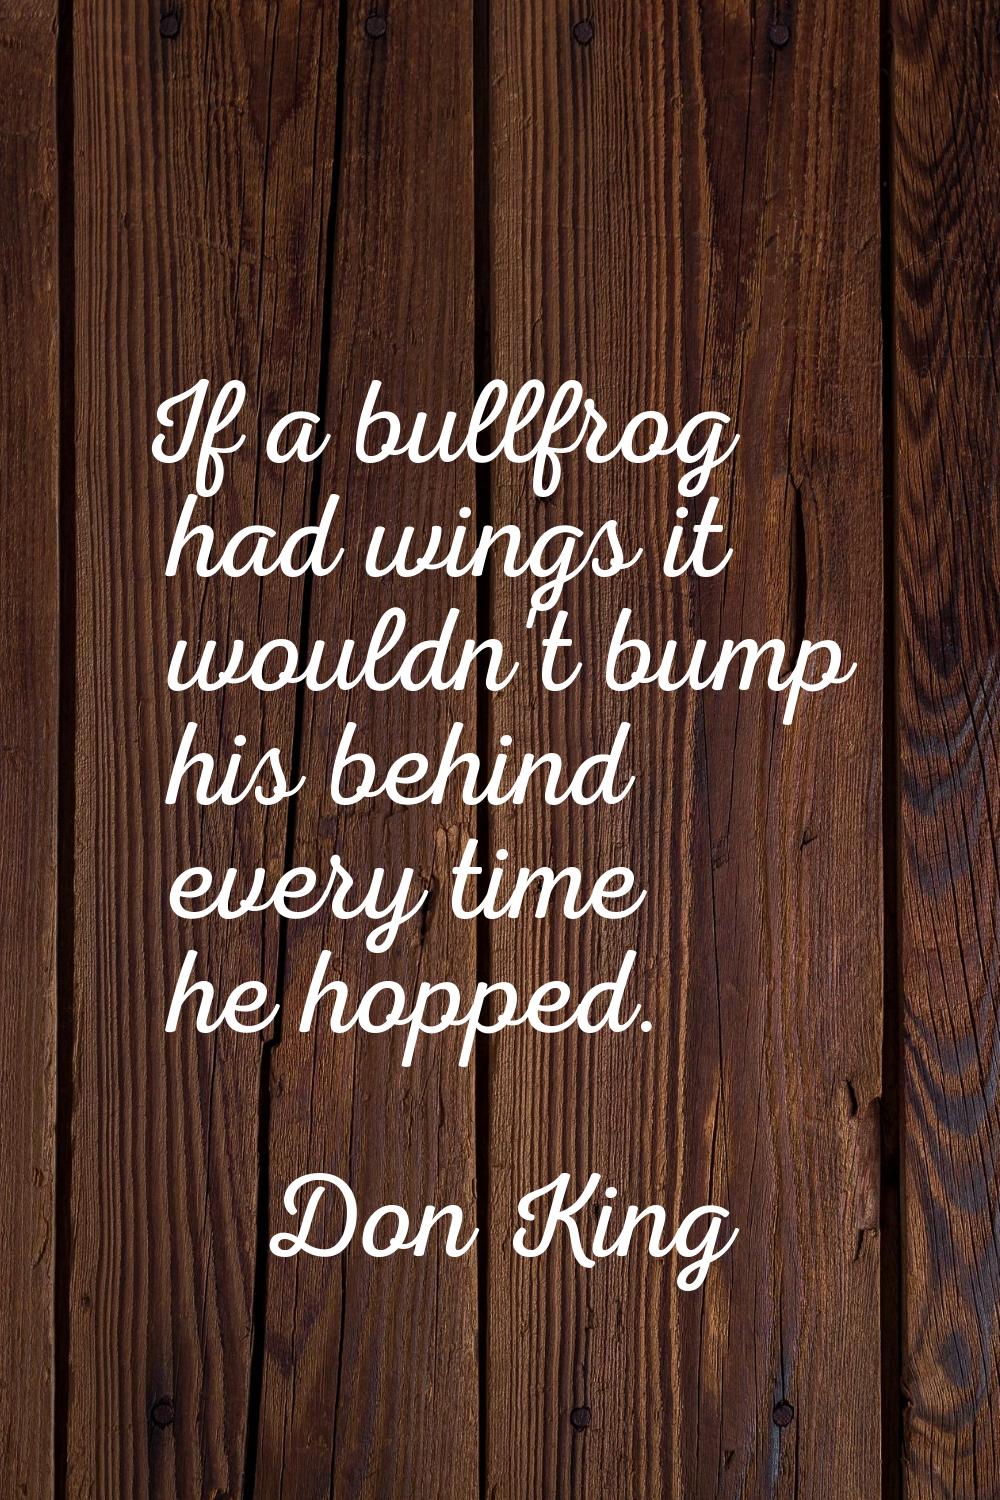 If a bullfrog had wings it wouldn't bump his behind every time he hopped.